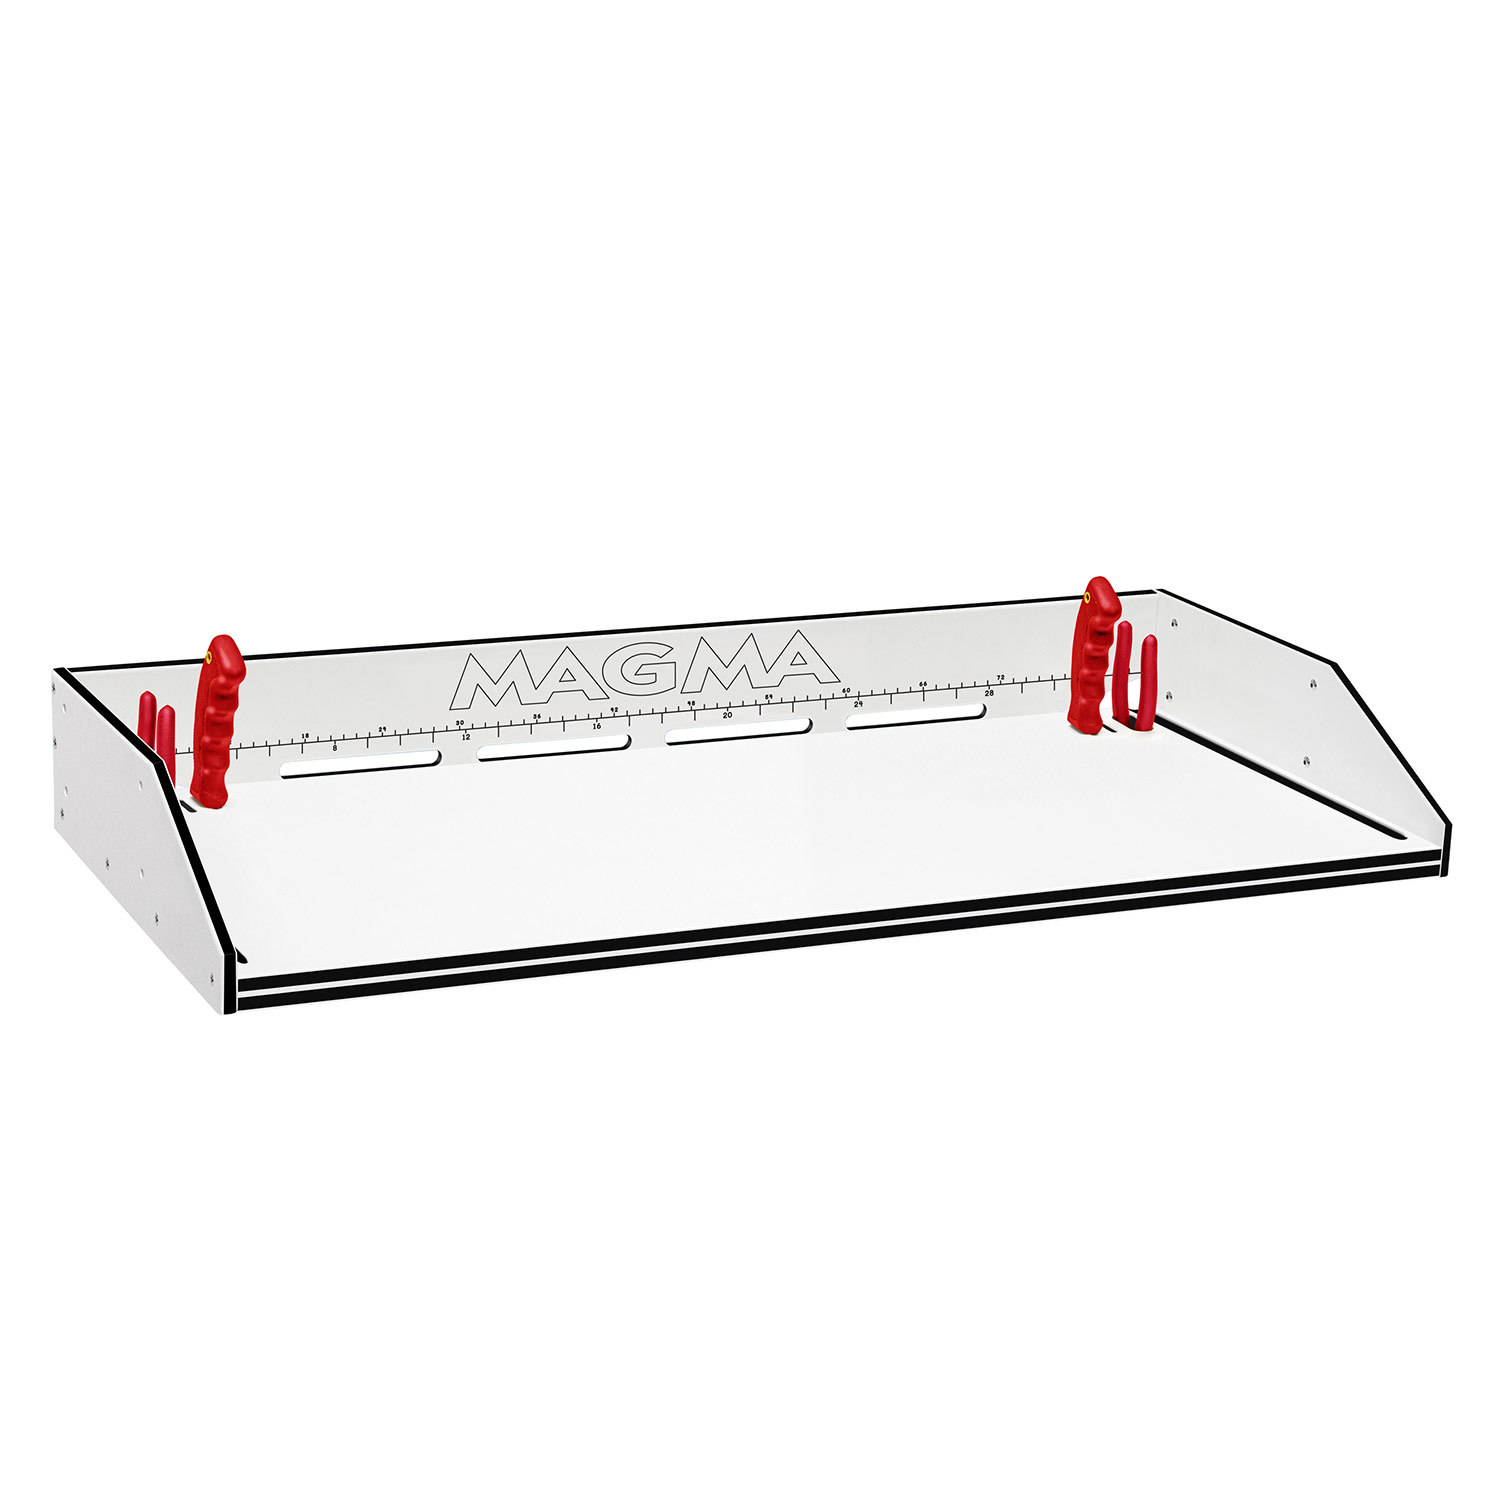 MAGMA 34 Tournament Series™ Fish Cleaning Station